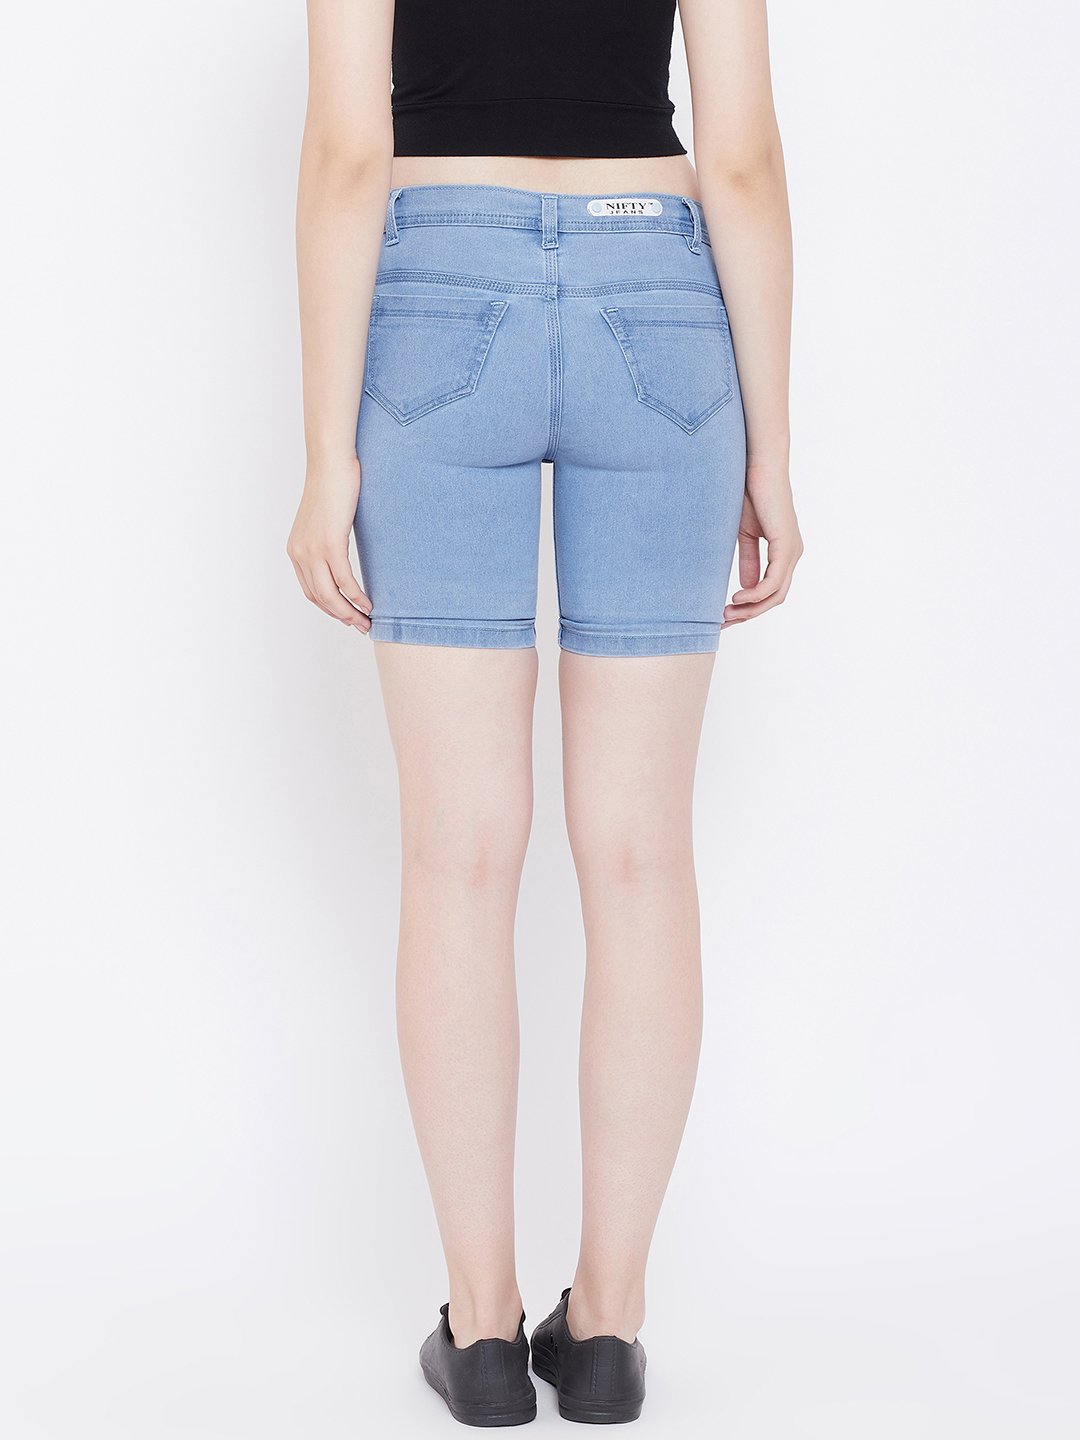 Slim Fit Stretchable Sky Blue Shorts - NiftyJeans